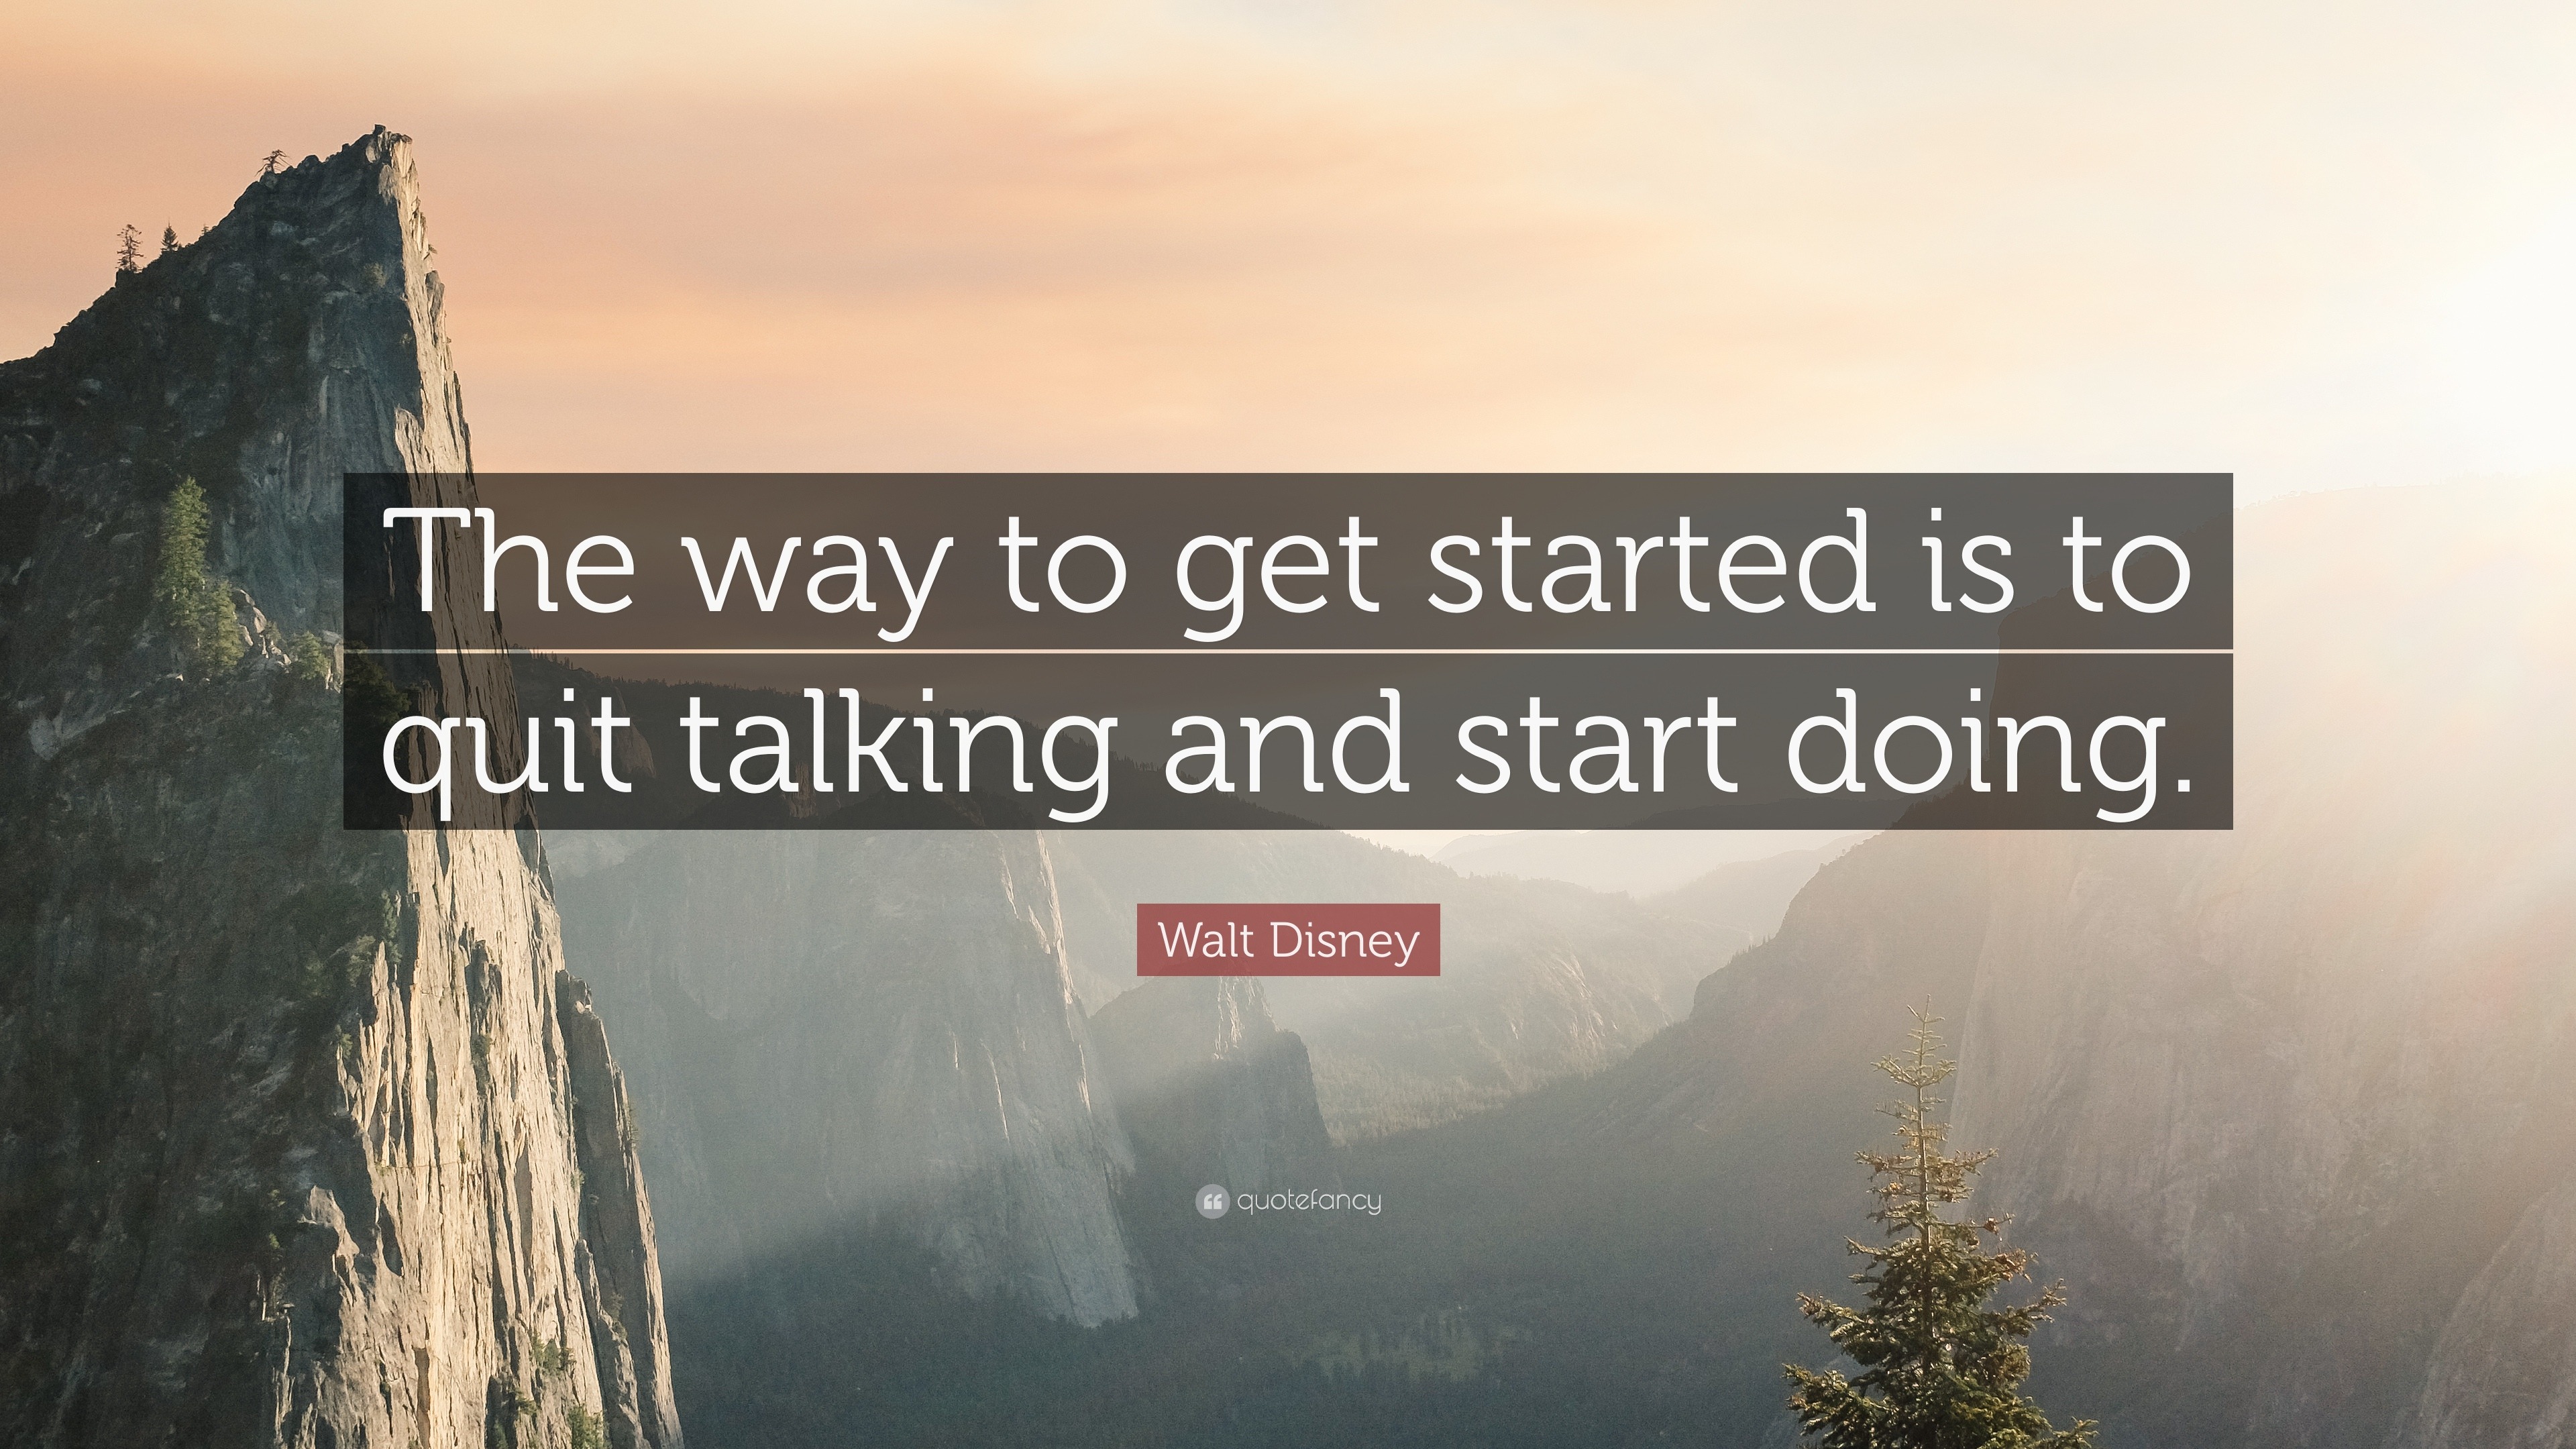 Walt Disney Quote: “The way to get started is to quit talking and start